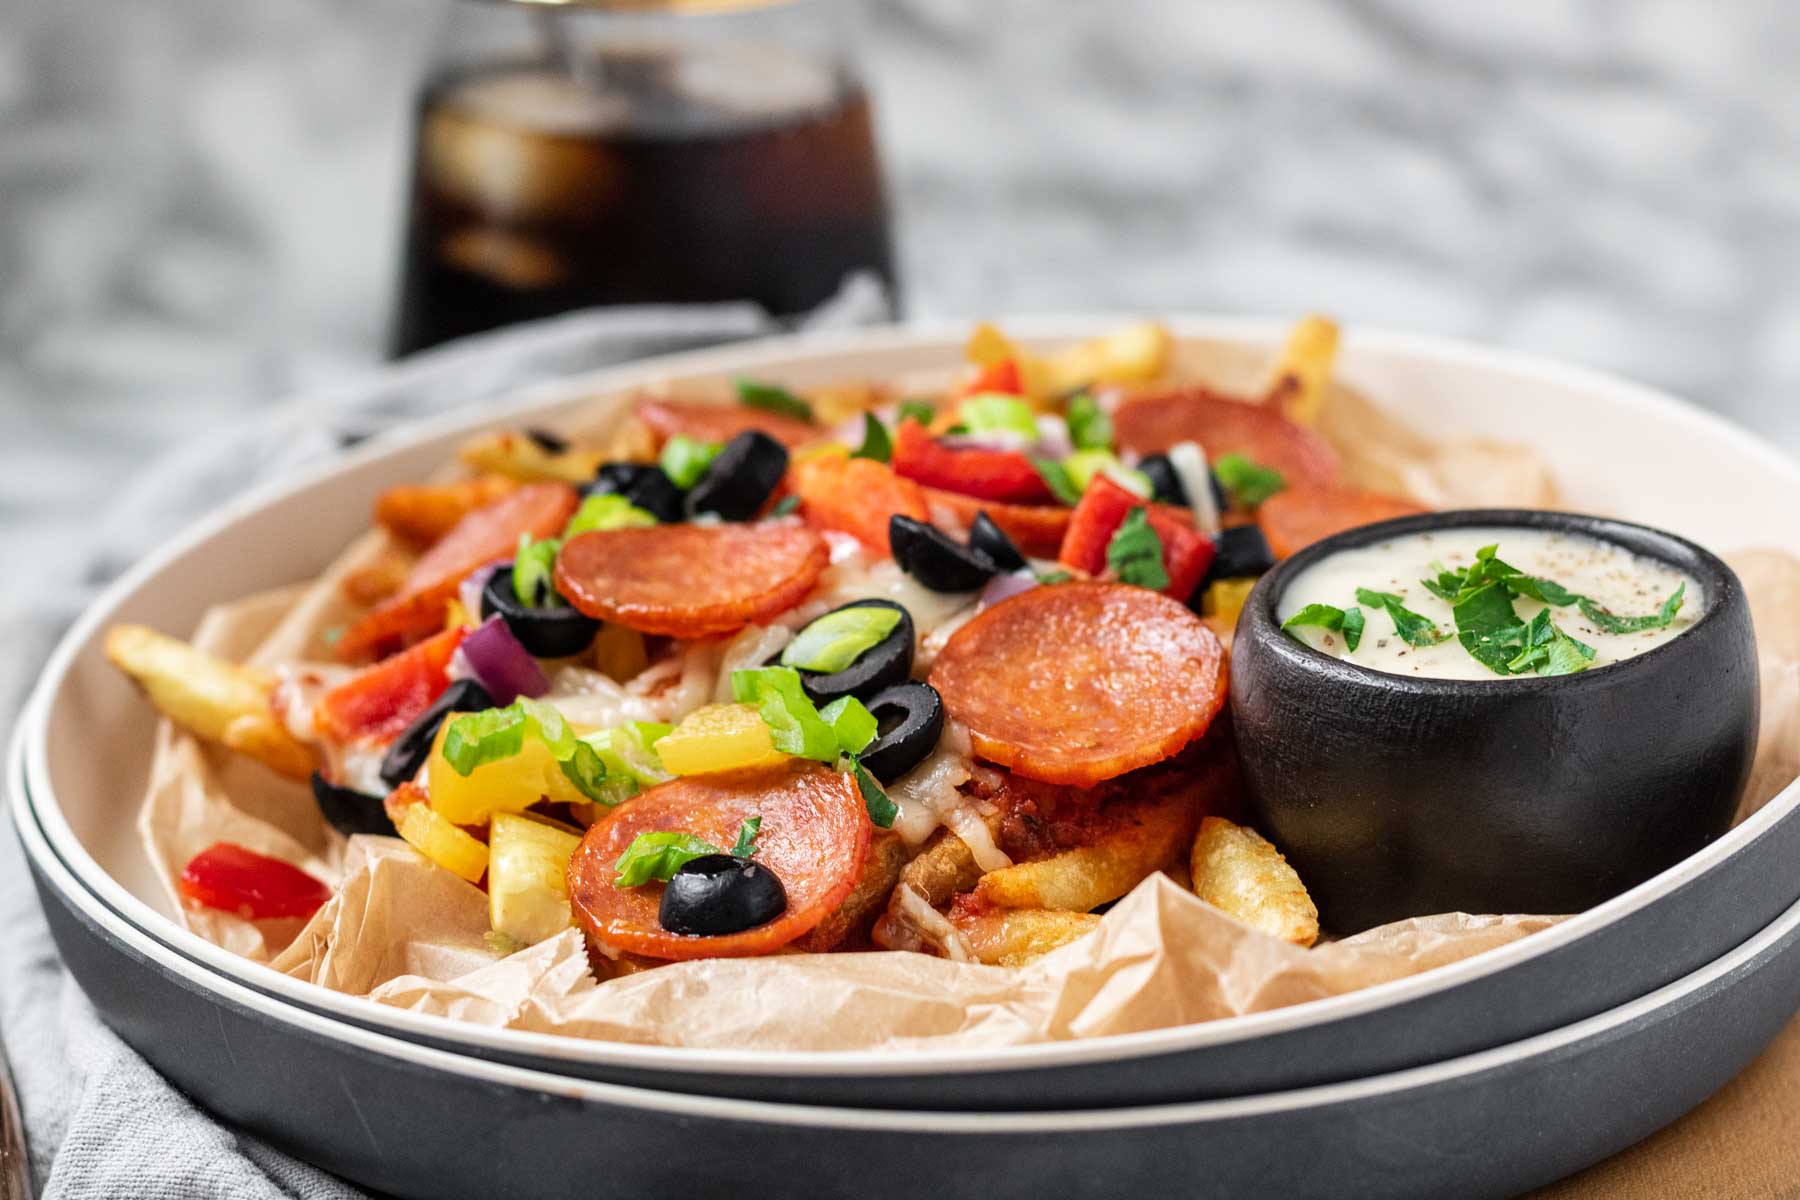 Baked fries on a plate with pizza toppings on top.